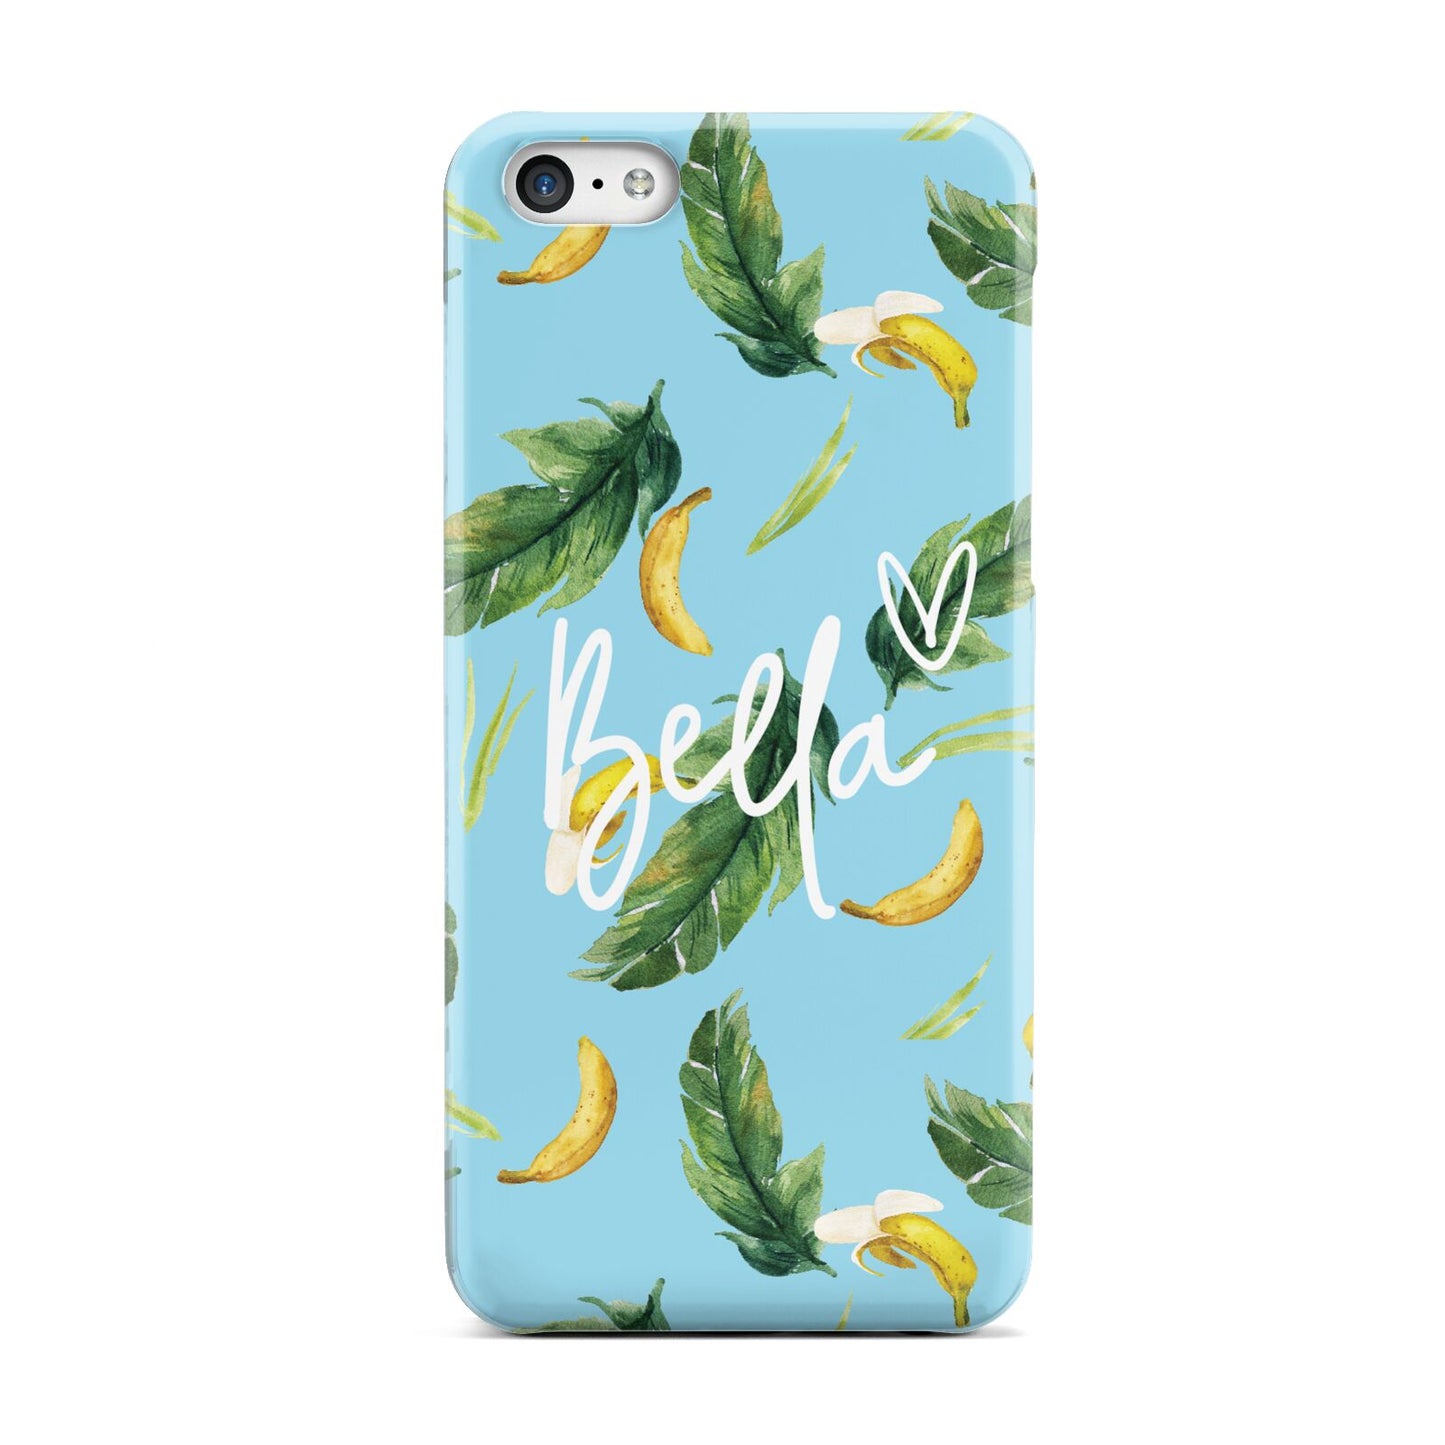 Personalised Blue Banana Tropical Apple iPhone 5c Case